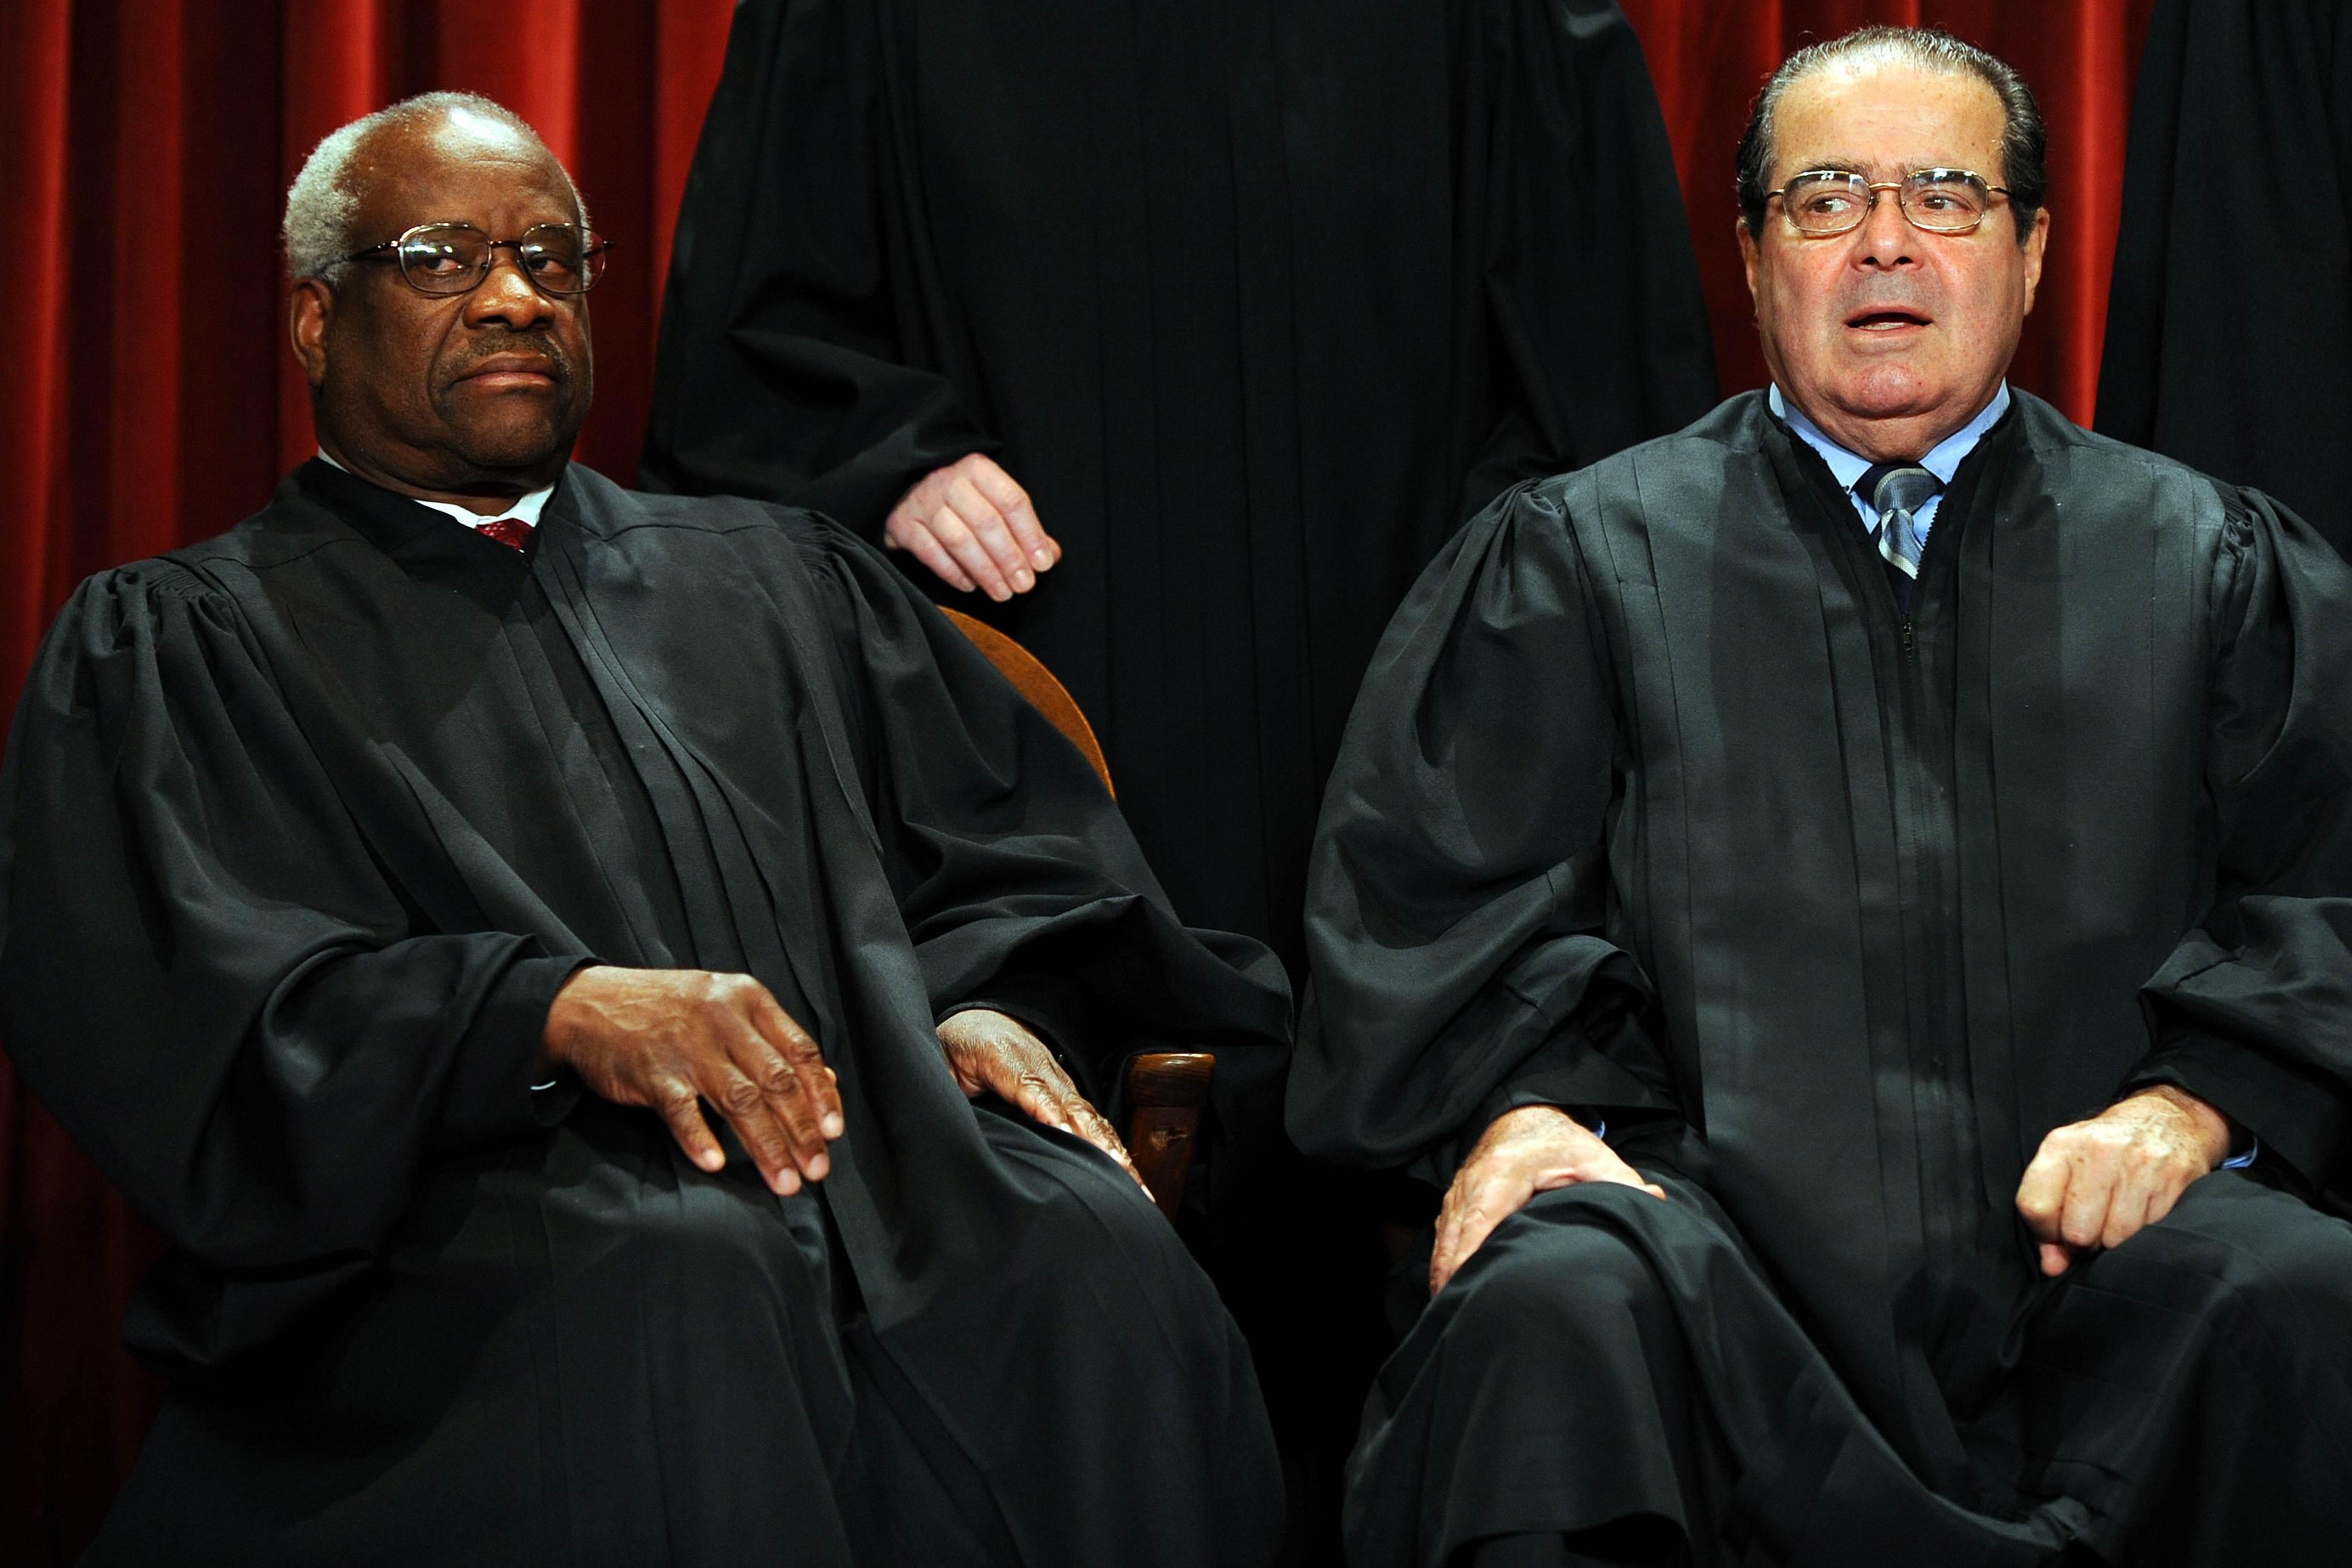 The justices seated in their robes Thomas frowning and Scalia with his mouth agape